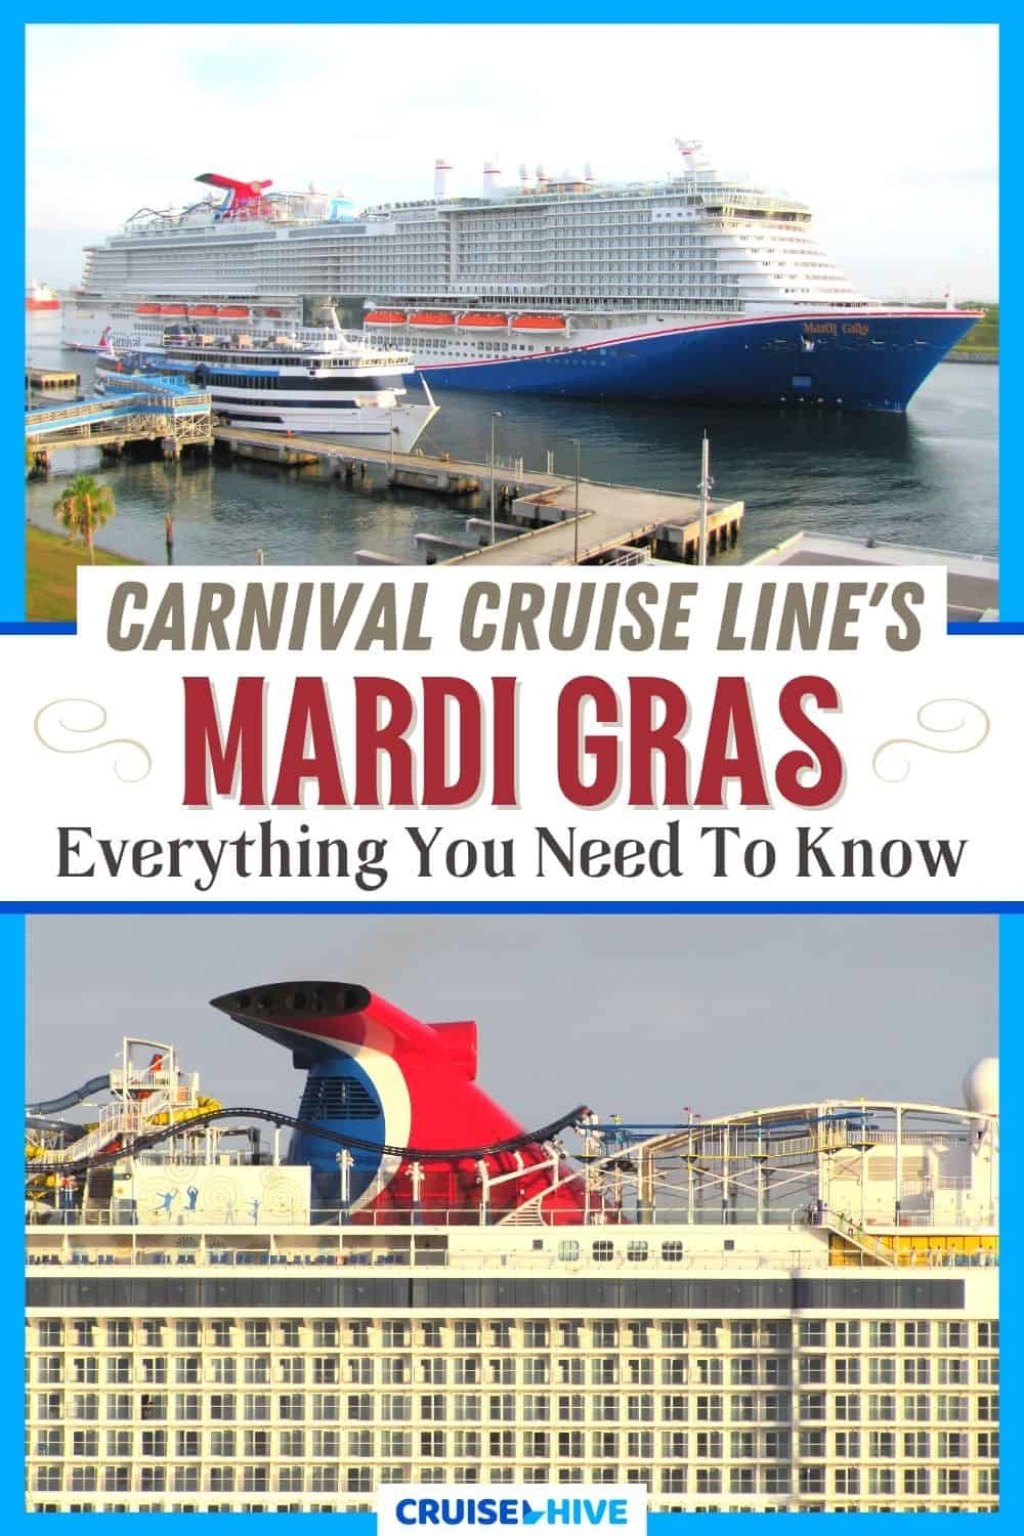 things to do on the mardi gras cruise ship - Carnival Mardi Gras Cruise Ship: Overview and Things to Do